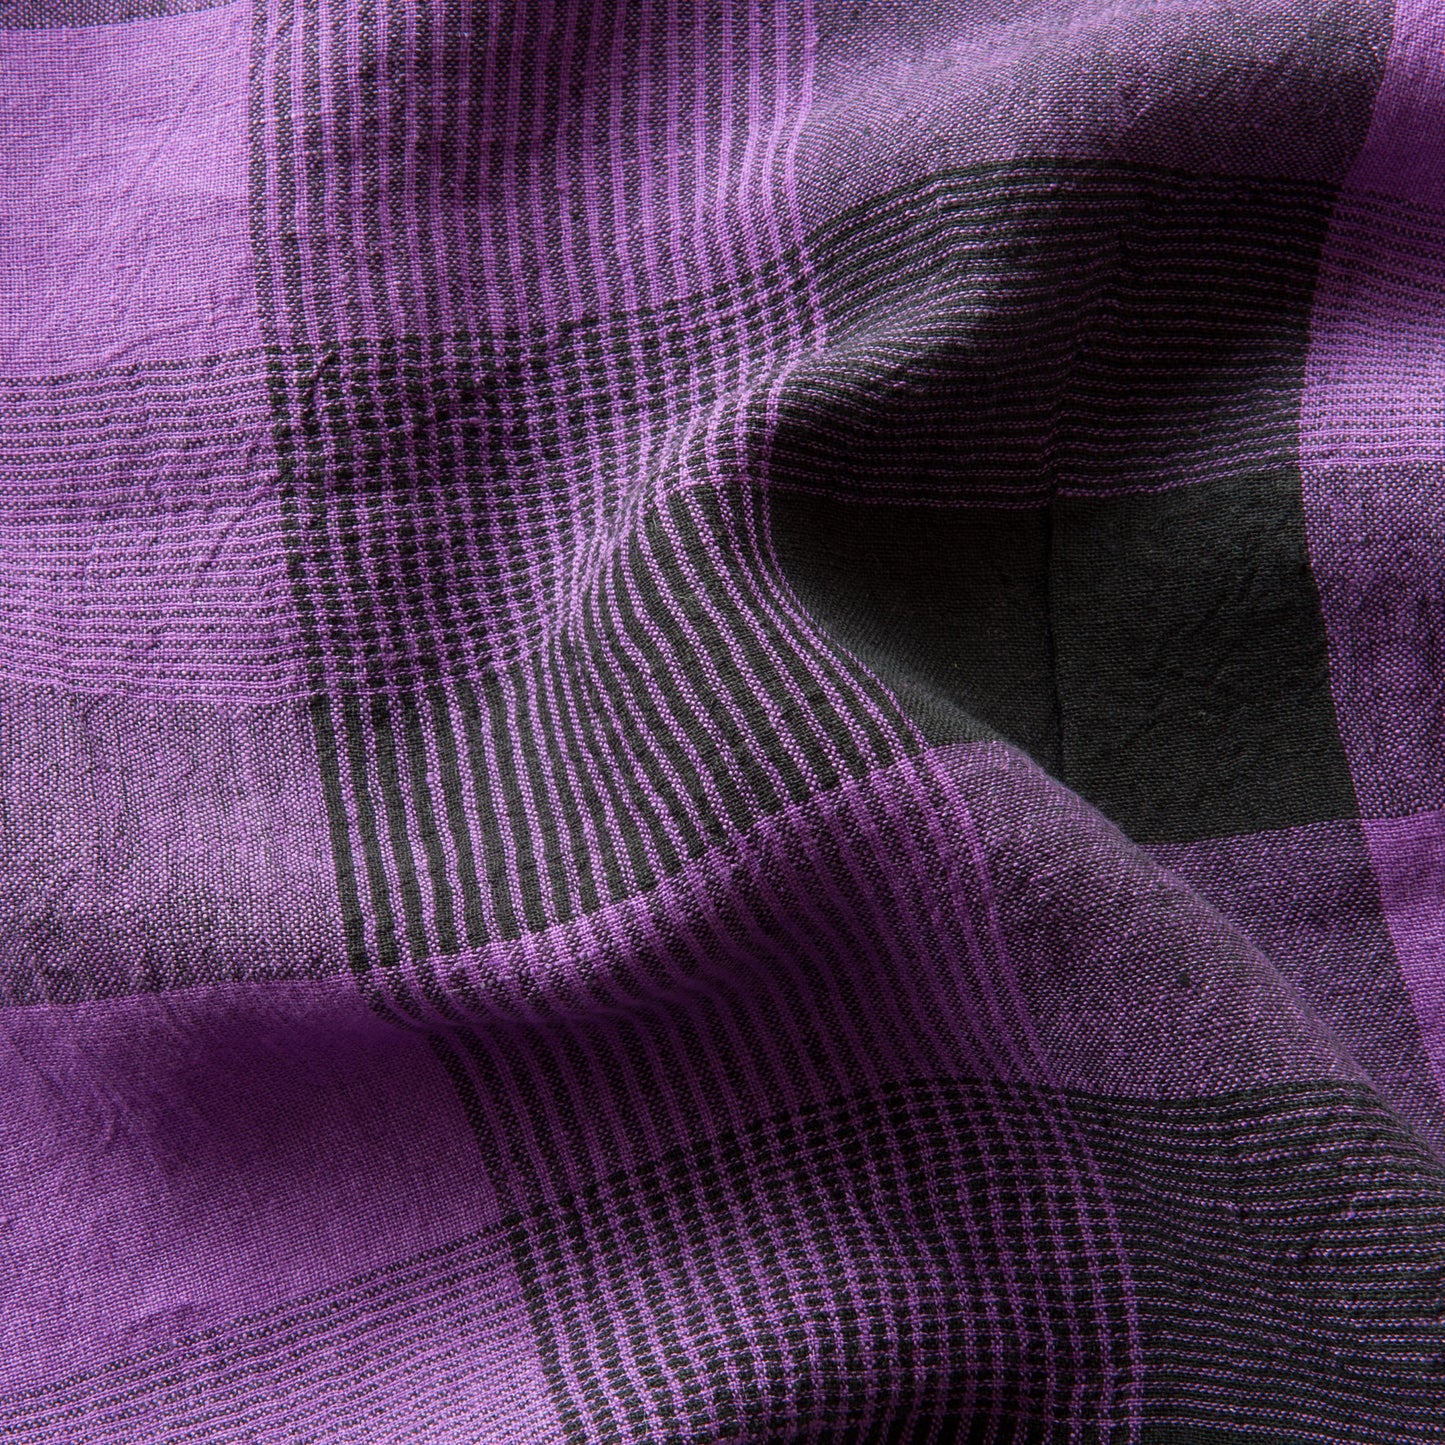 Checked Linen Fabric in Purple and Black